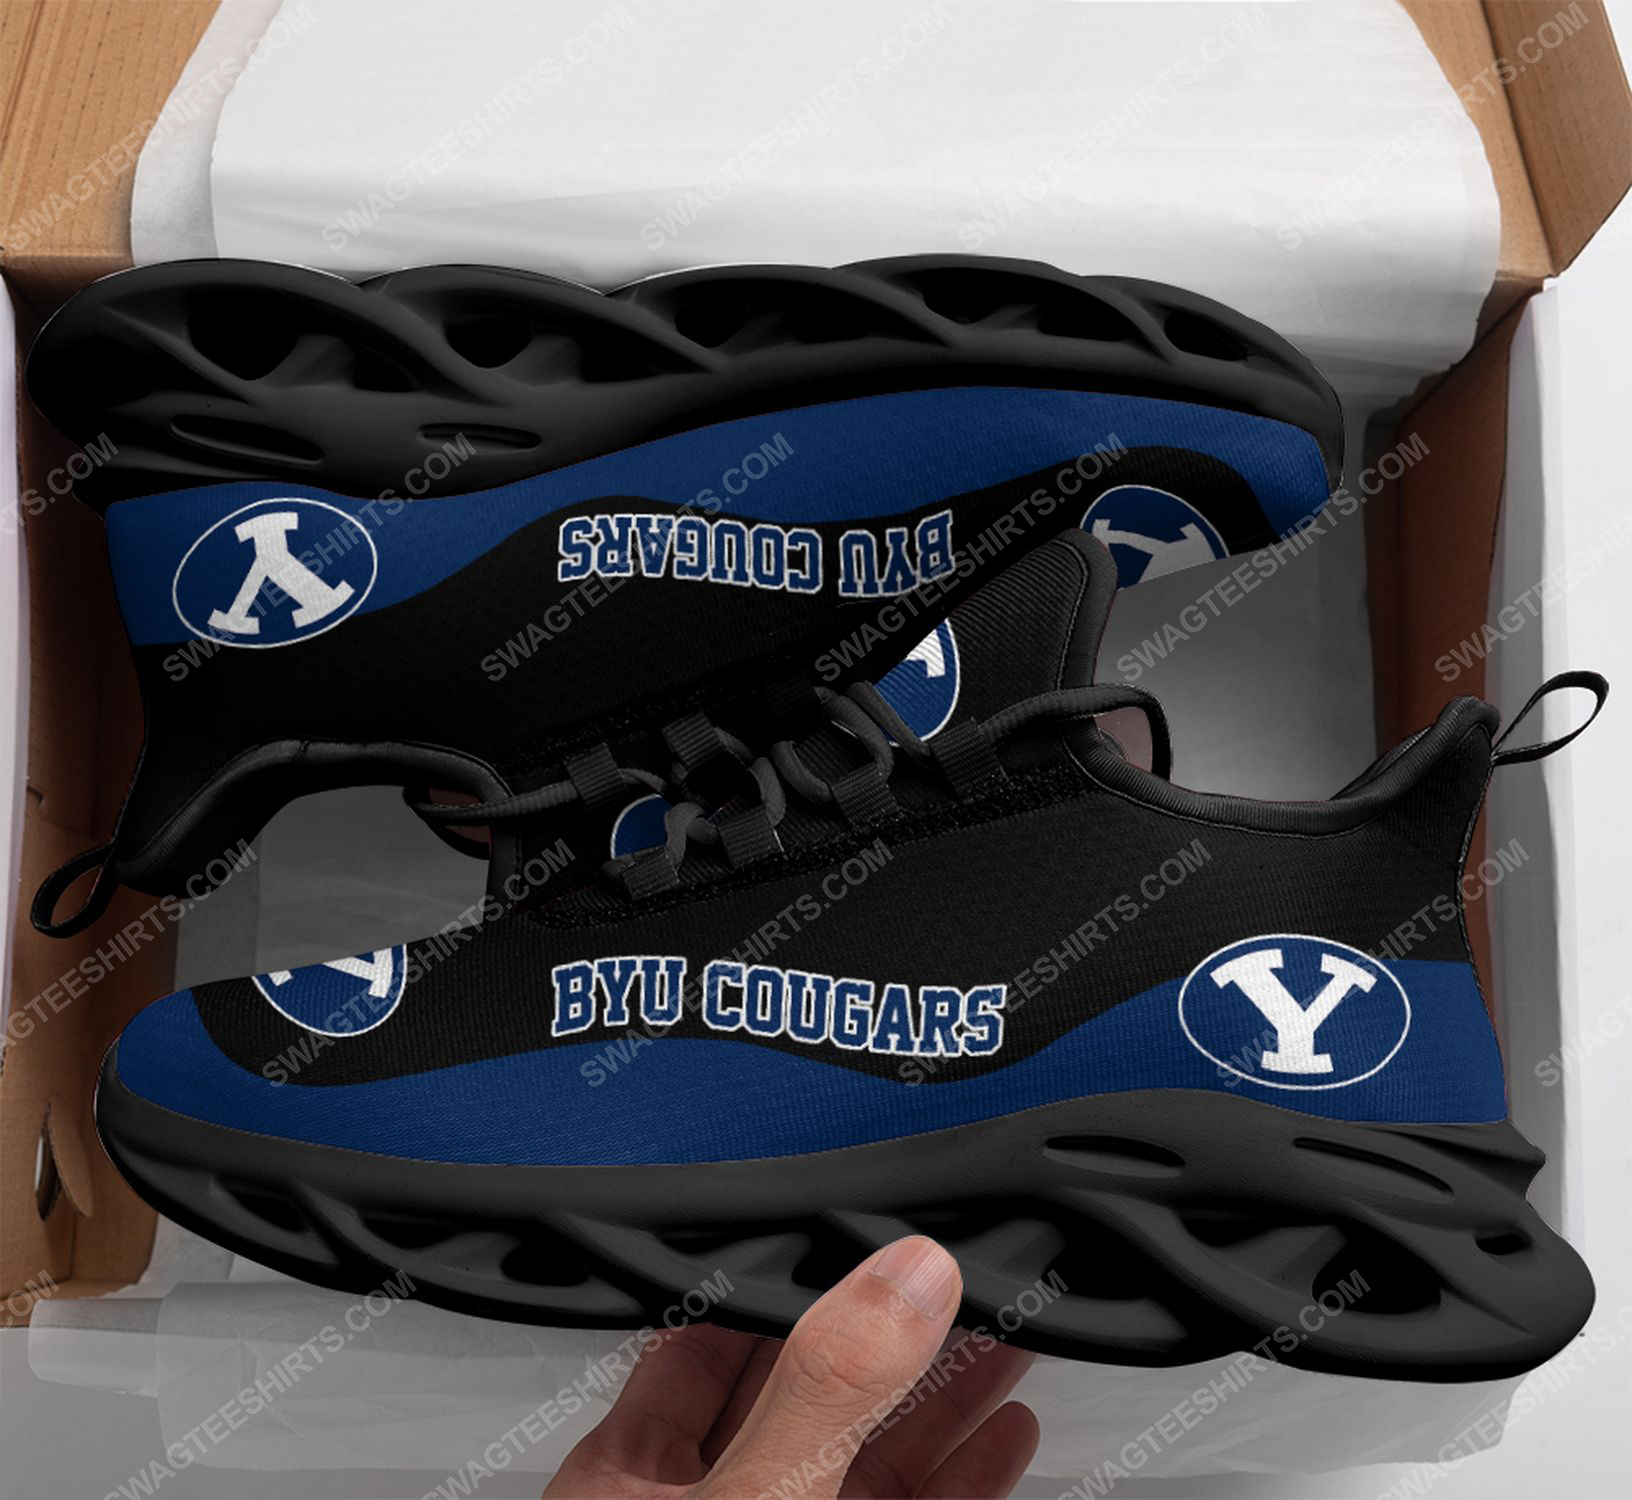 The byu cougars football team max soul shoes 3